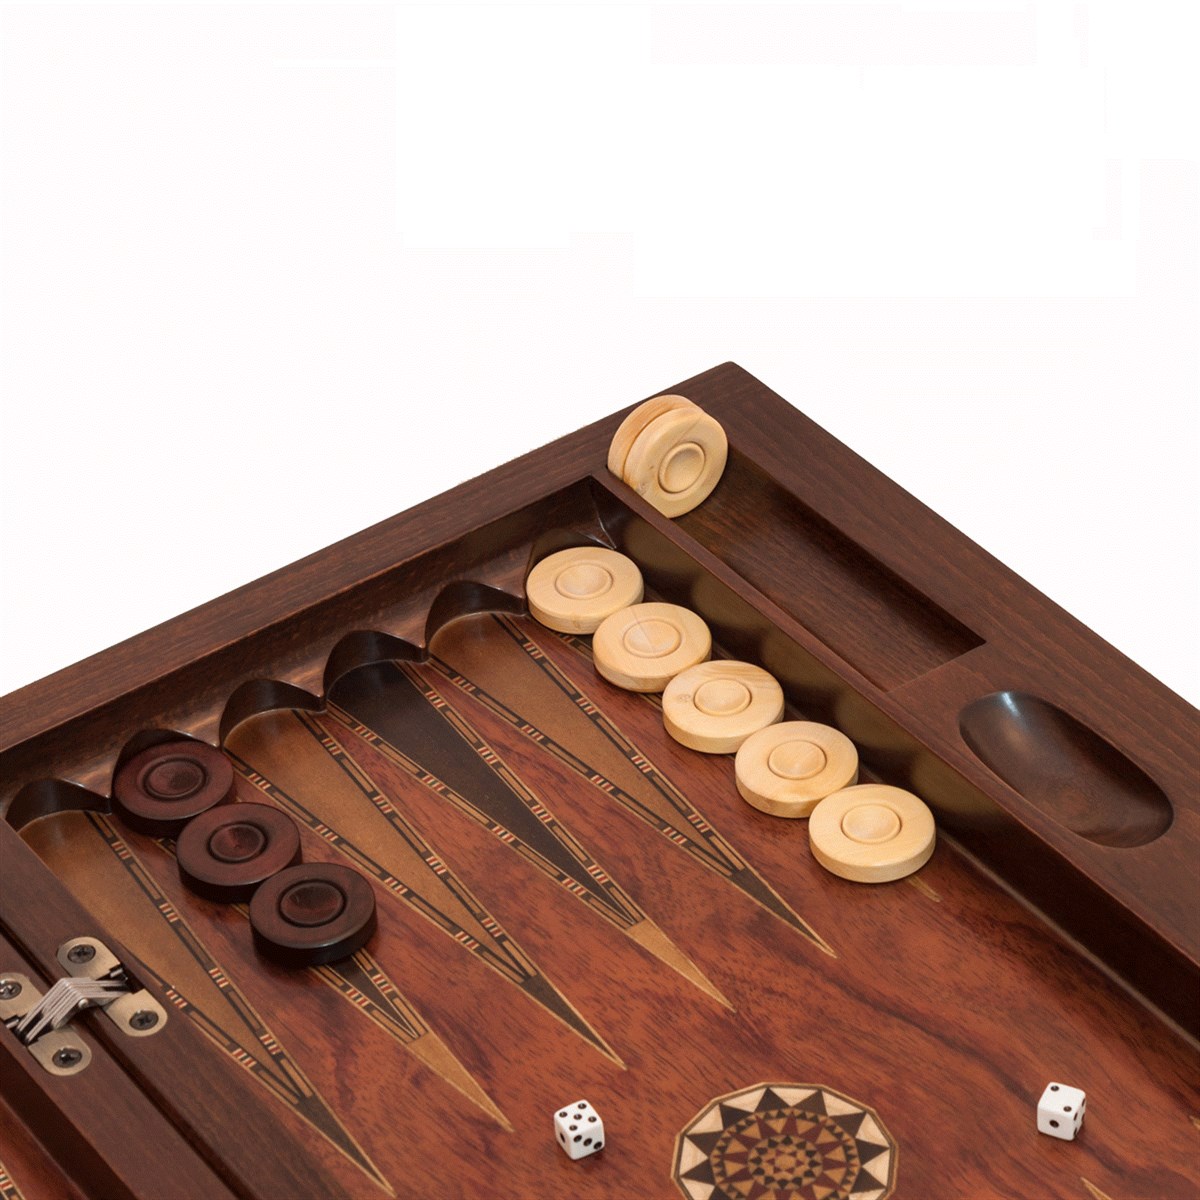 Details about   Carved backgammon handmade from  wood